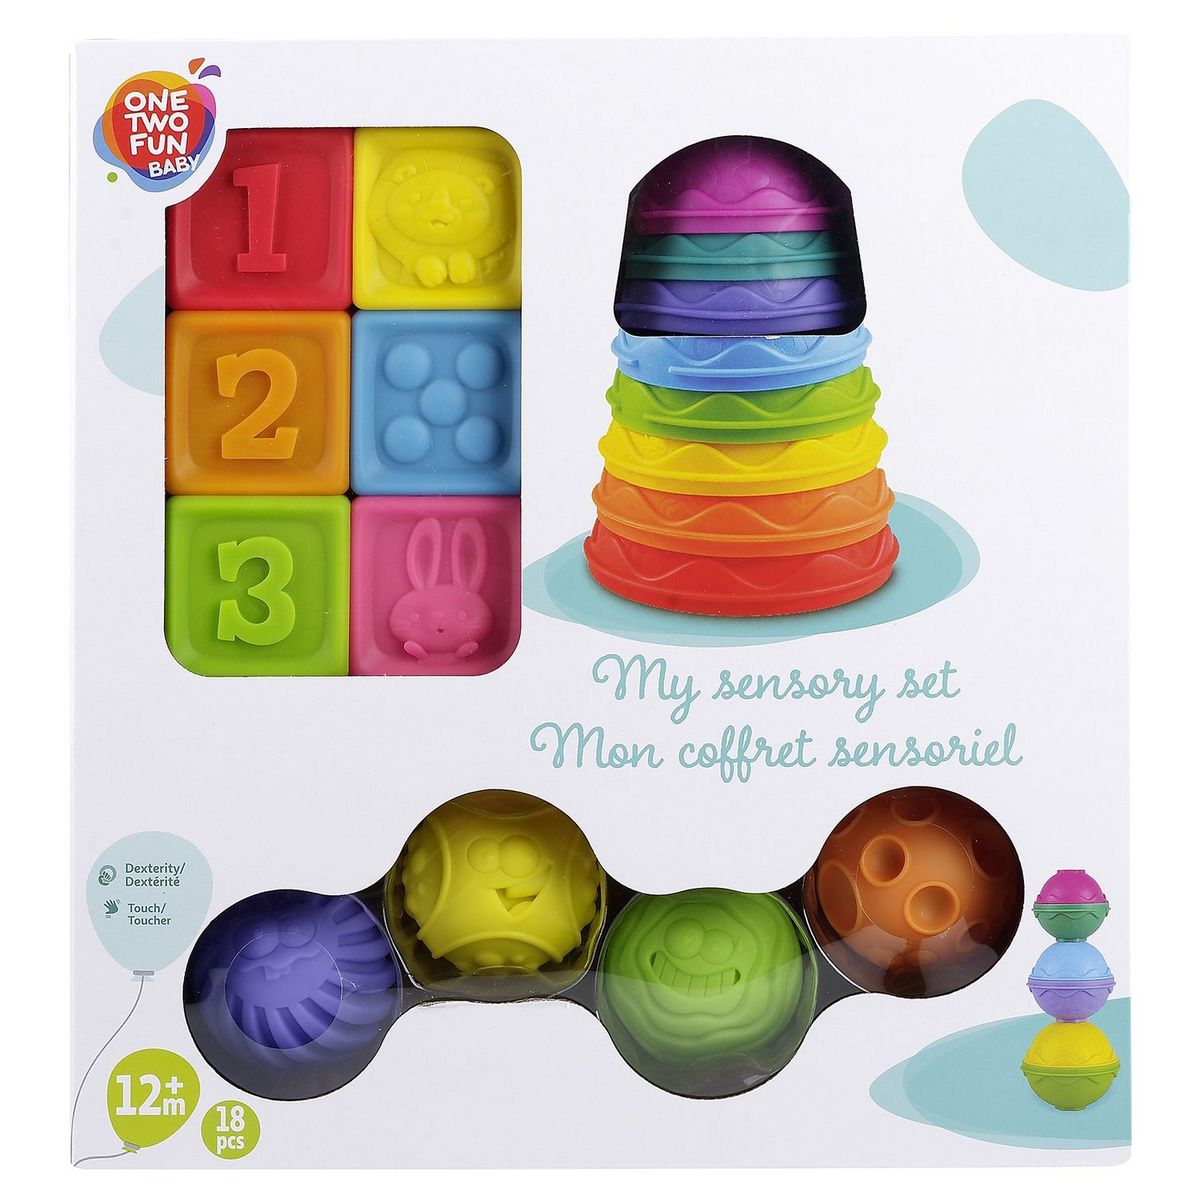 Fun for two. One two fun игрушки. Two in one игрушка. Игрушки one two fun Ашан раковина. Ejeetion Toys in one 2 in 1 Color.